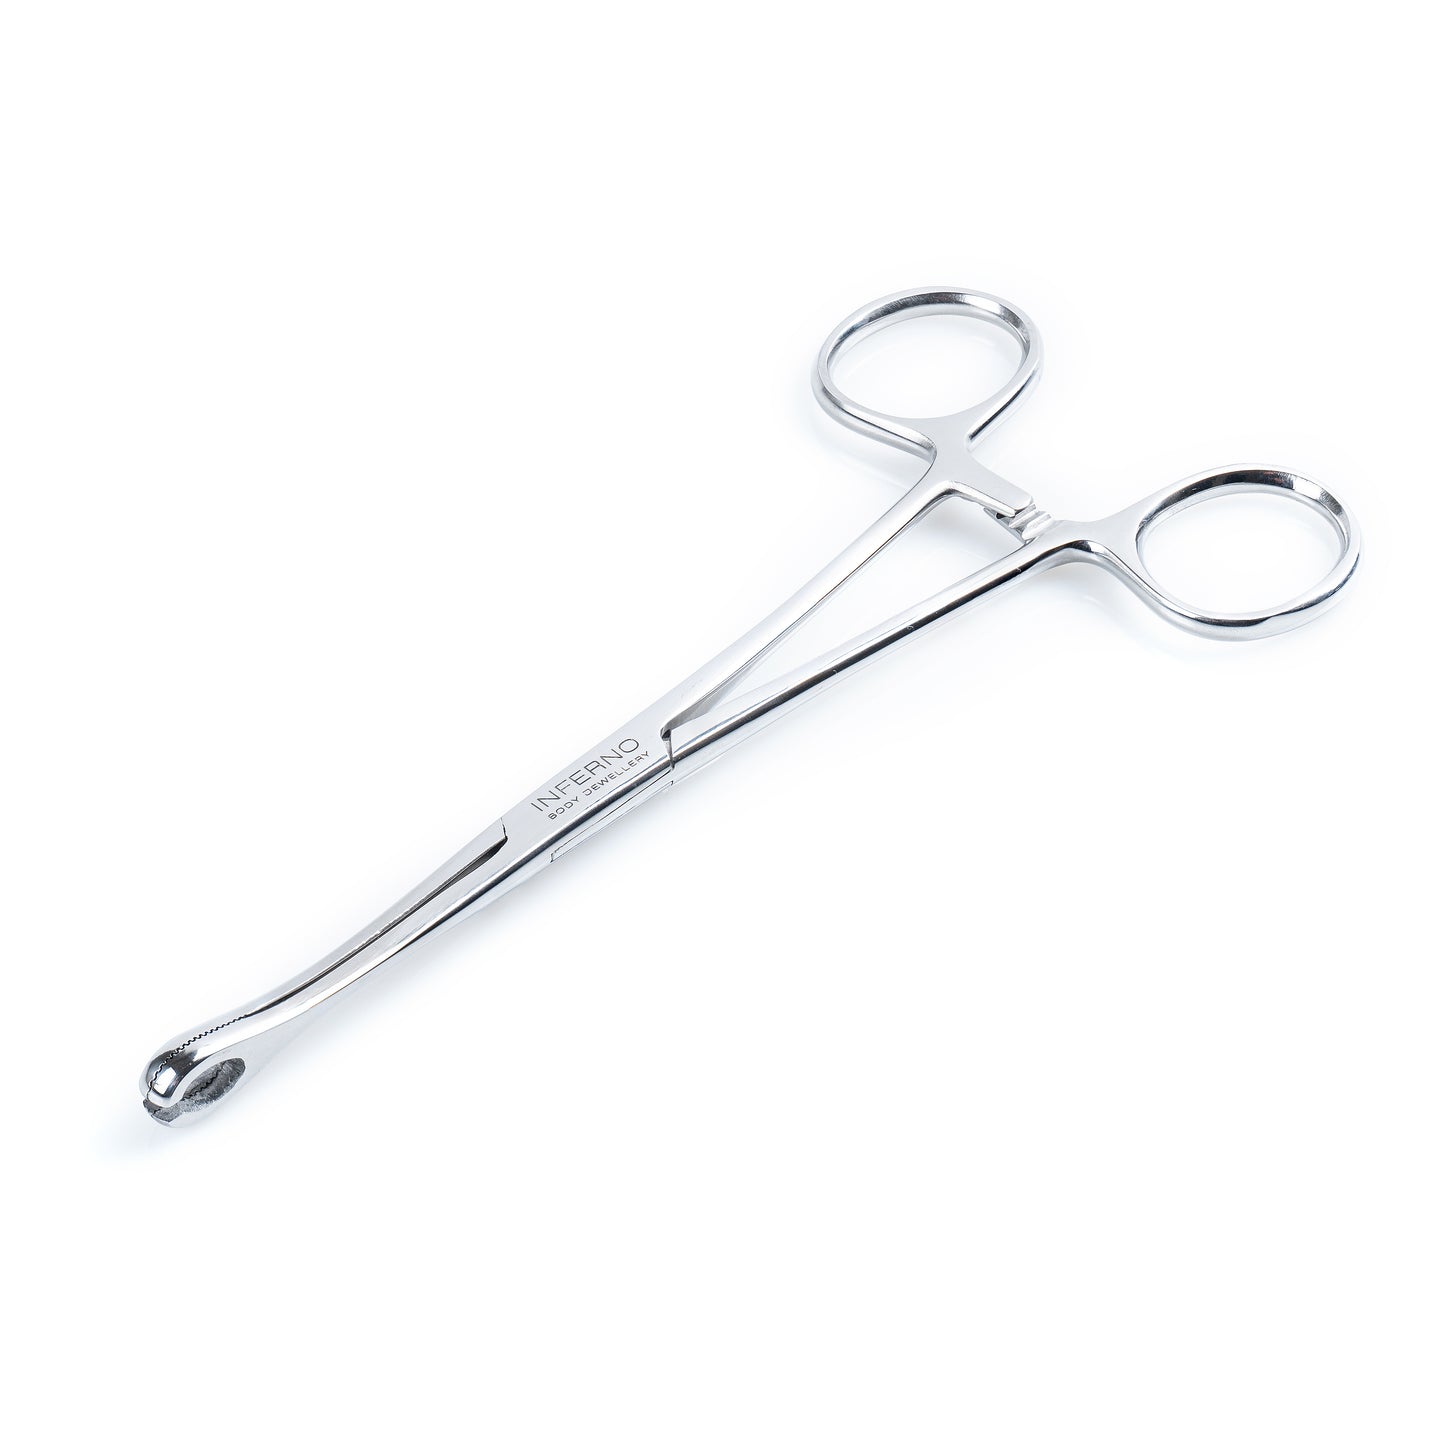 Mini Slotted Forester Forceps